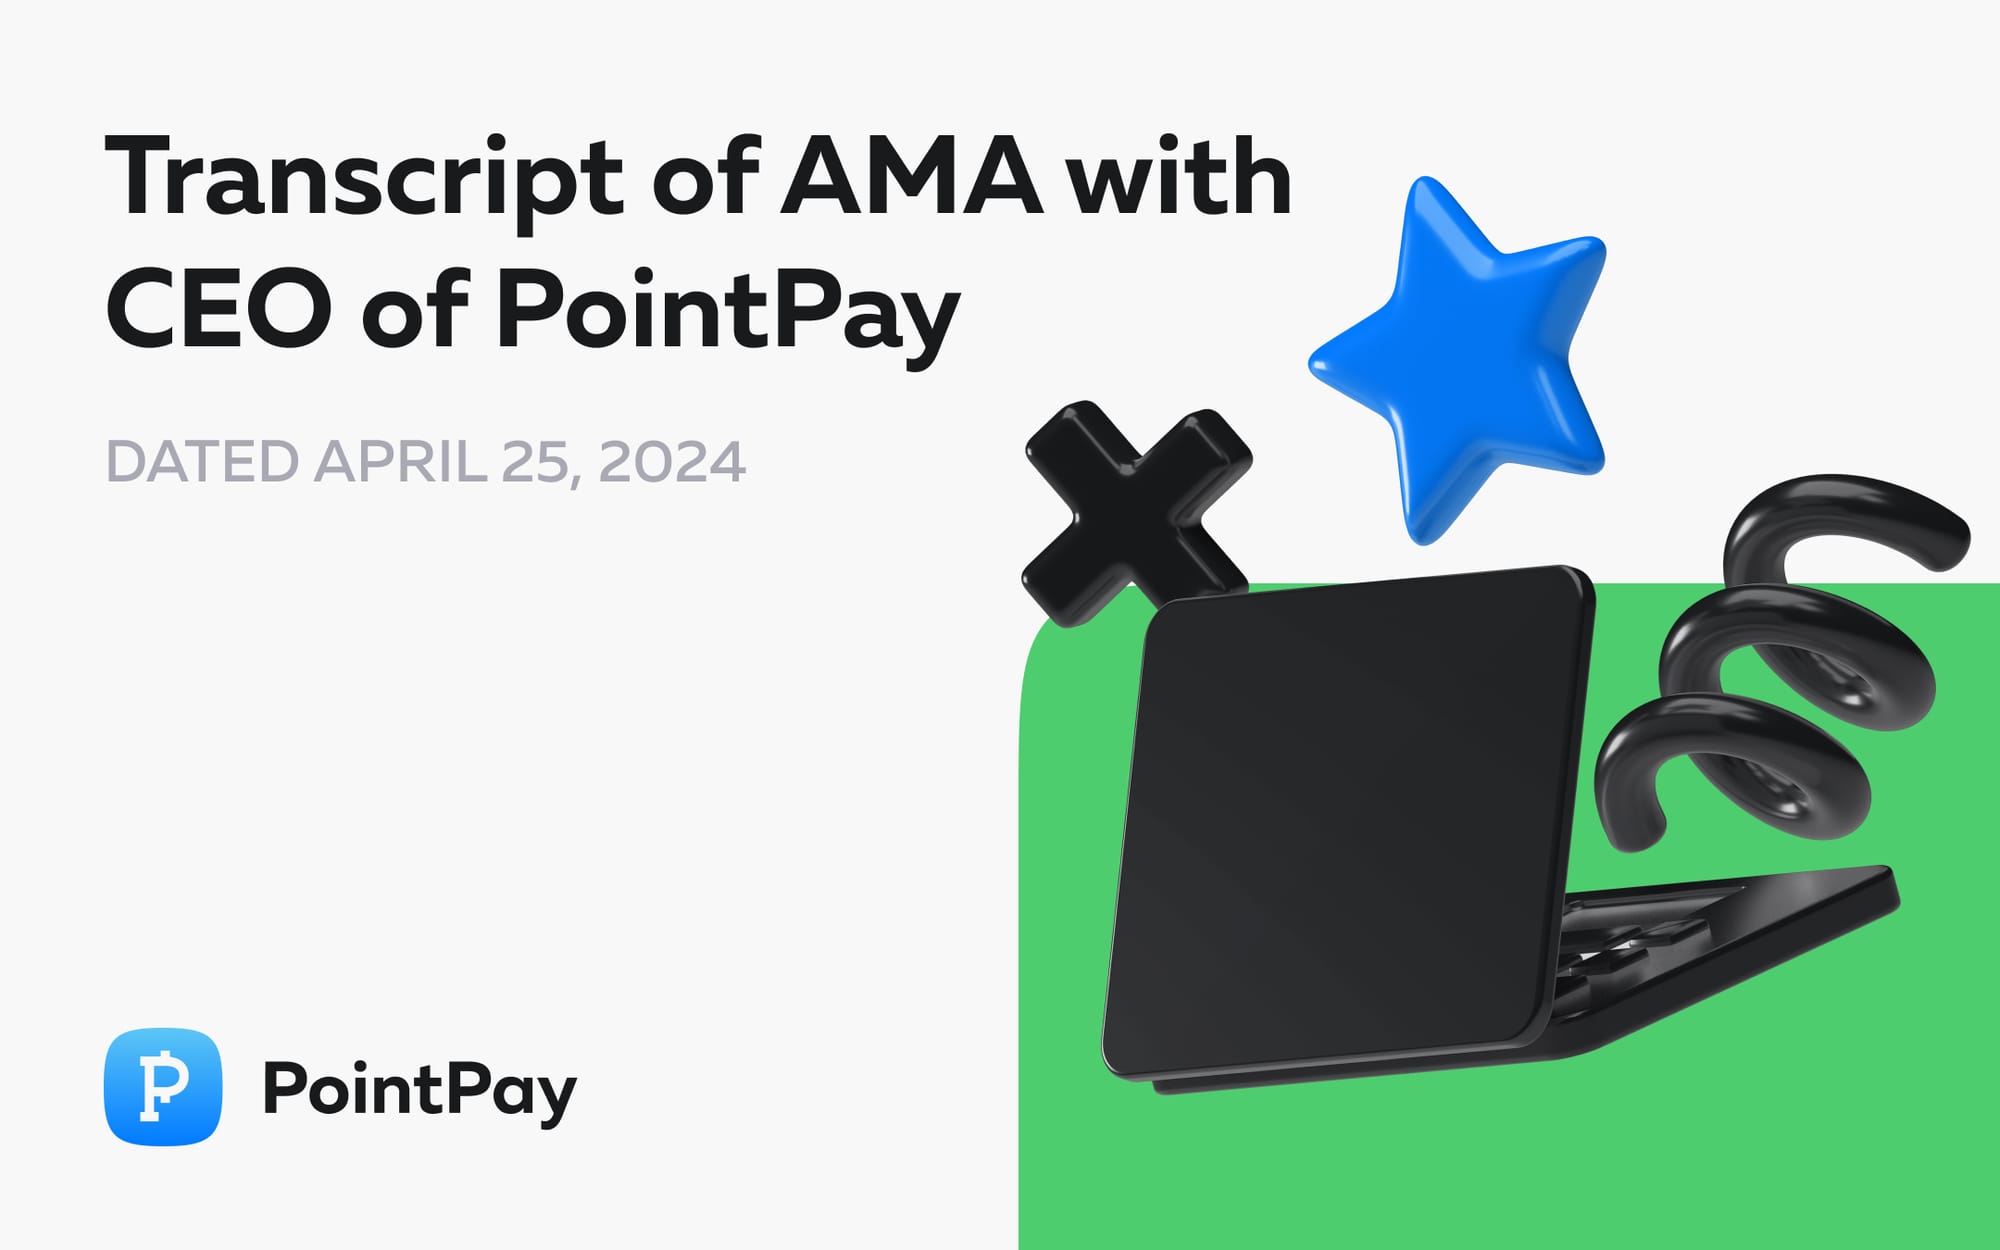 Transcript of AMA with CEO of PointPay – Vladimir Kardapoltsev, April 25th 2024